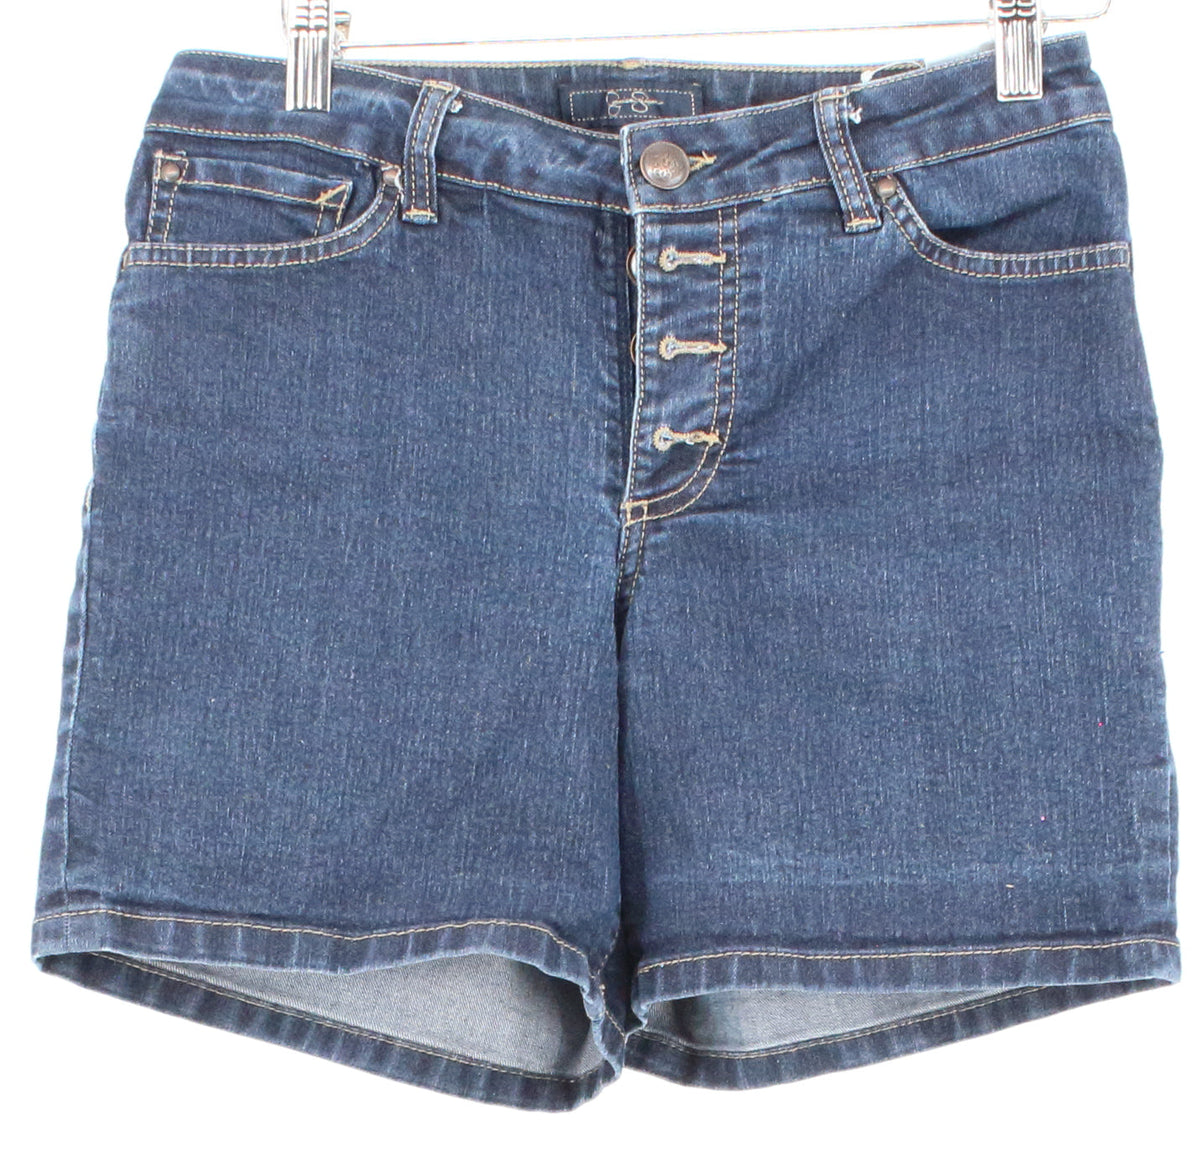 Jessica Simpson High Waisted Denim Blue Shorts With Multi Button